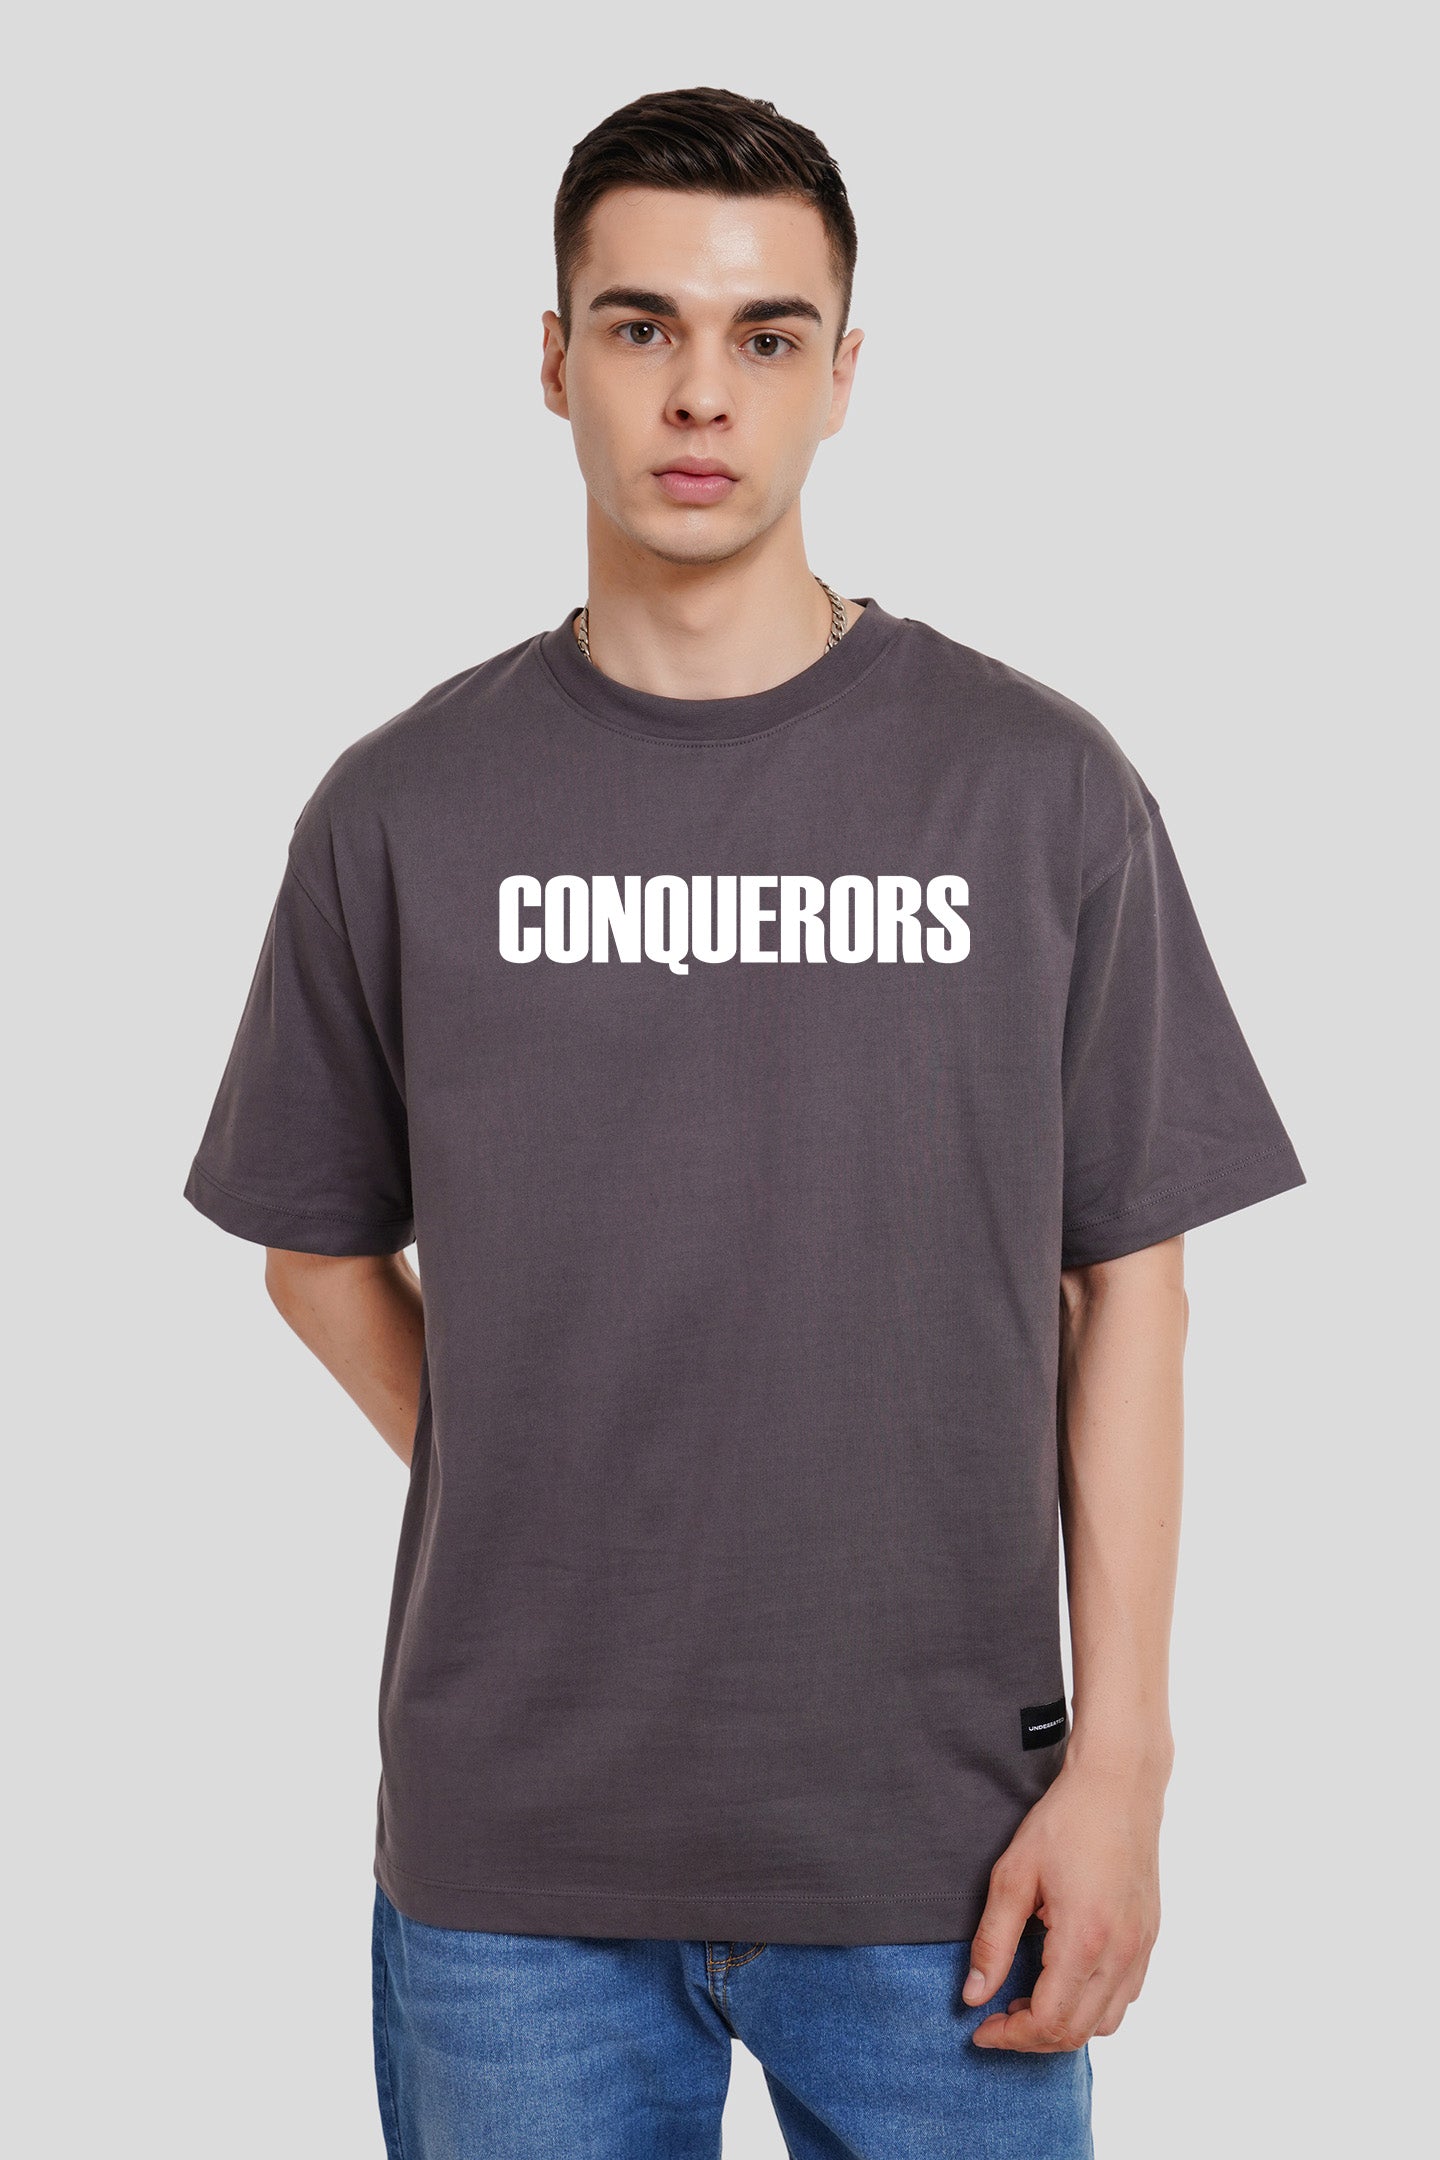 More Than Conquerors Dark Grey Printed T Shirt Men Oversized Fit With Front And Back Design Pic 1